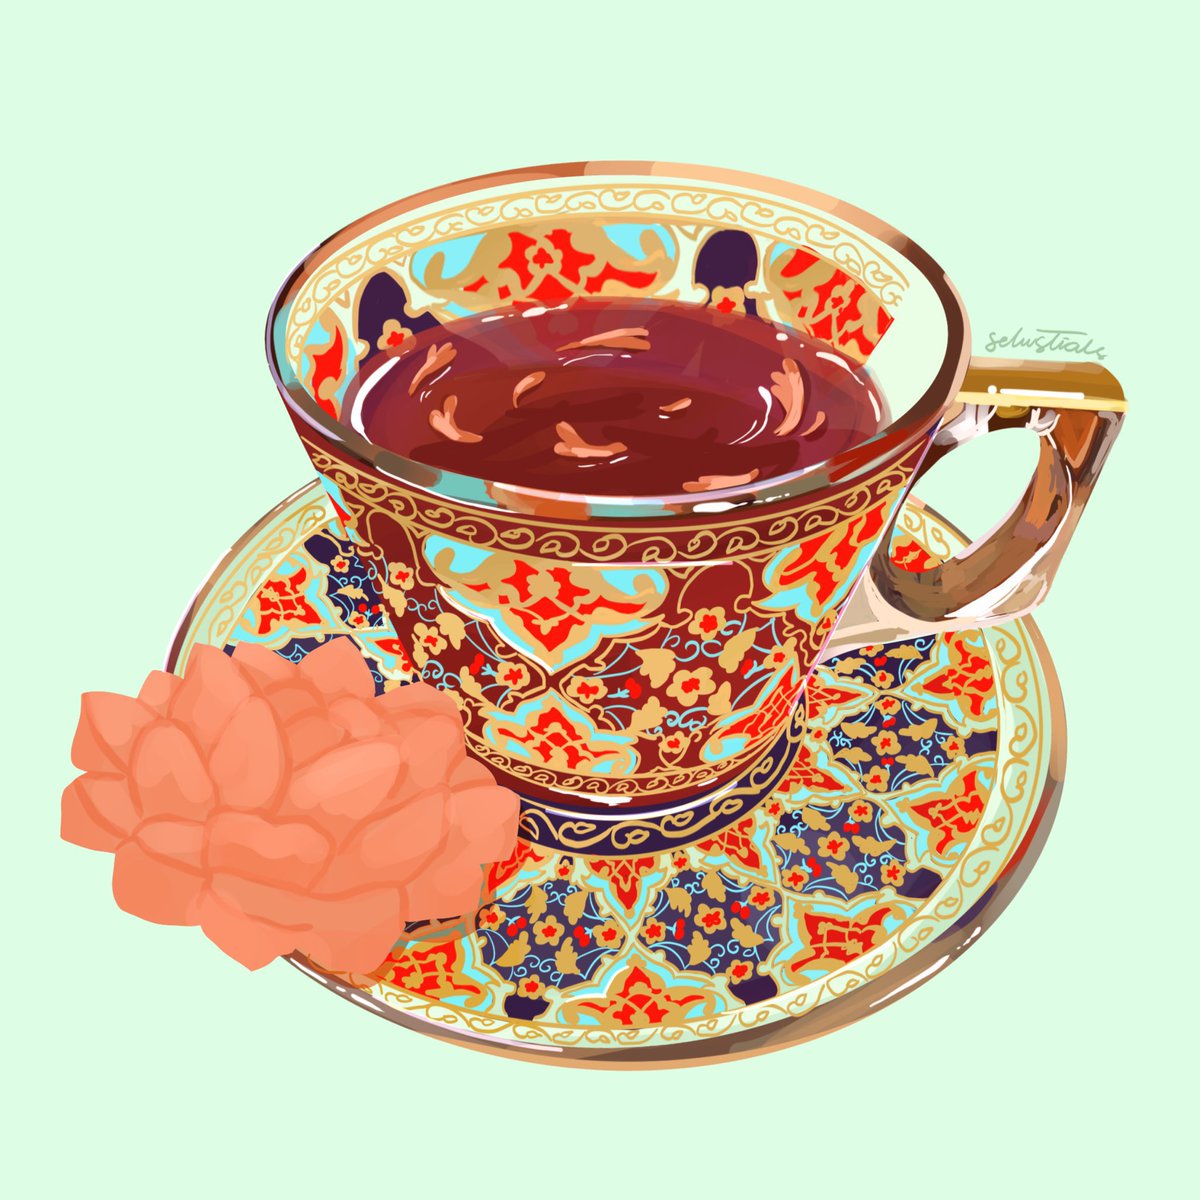 「probably these iconic teacup studies!   」|꒰ rain ꒱のイラスト